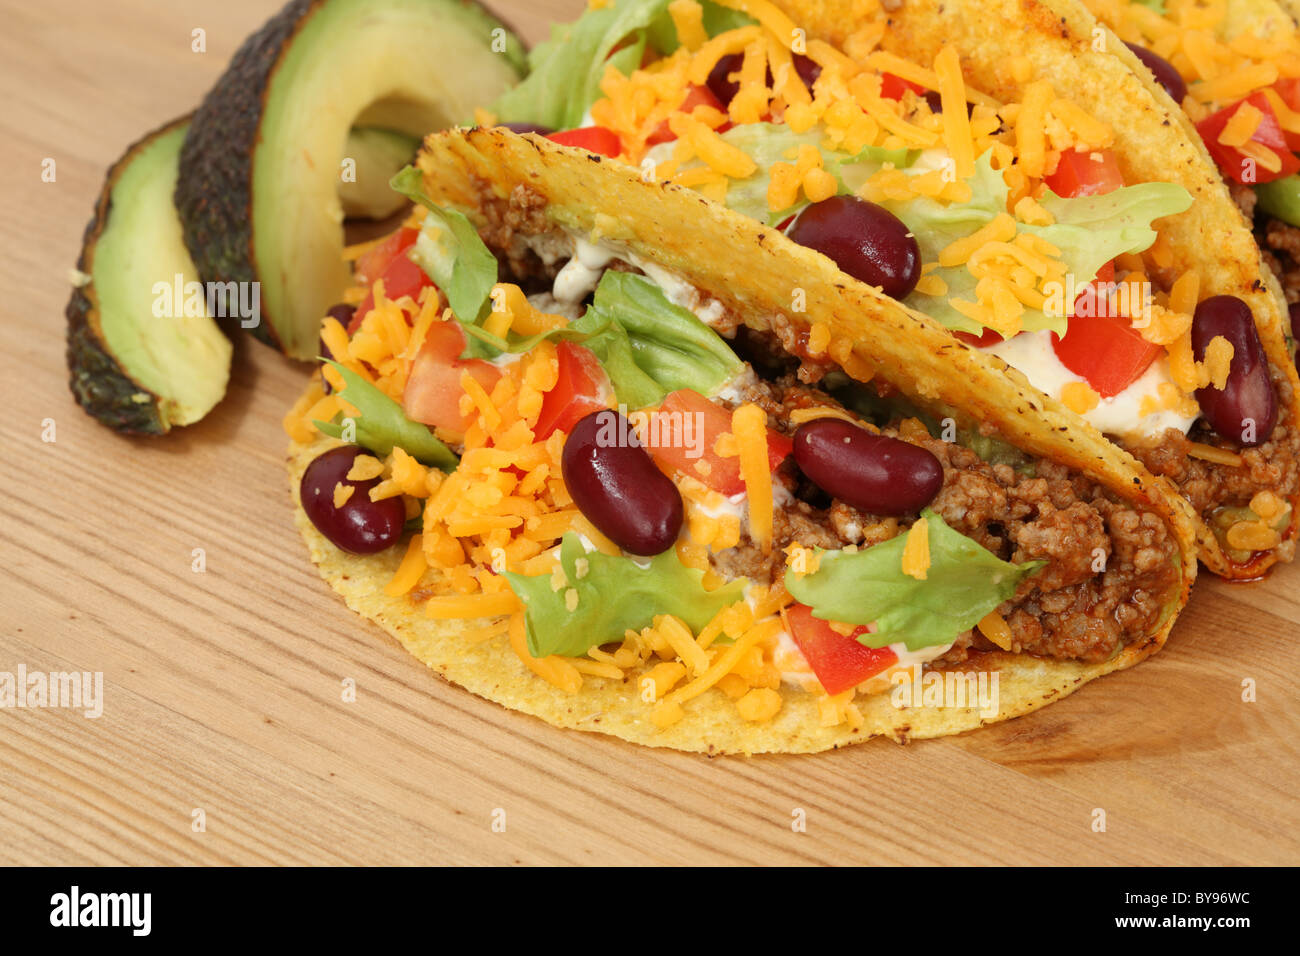 Mexican food - tacos filled with minced meat, cheese and beans Stock Photo